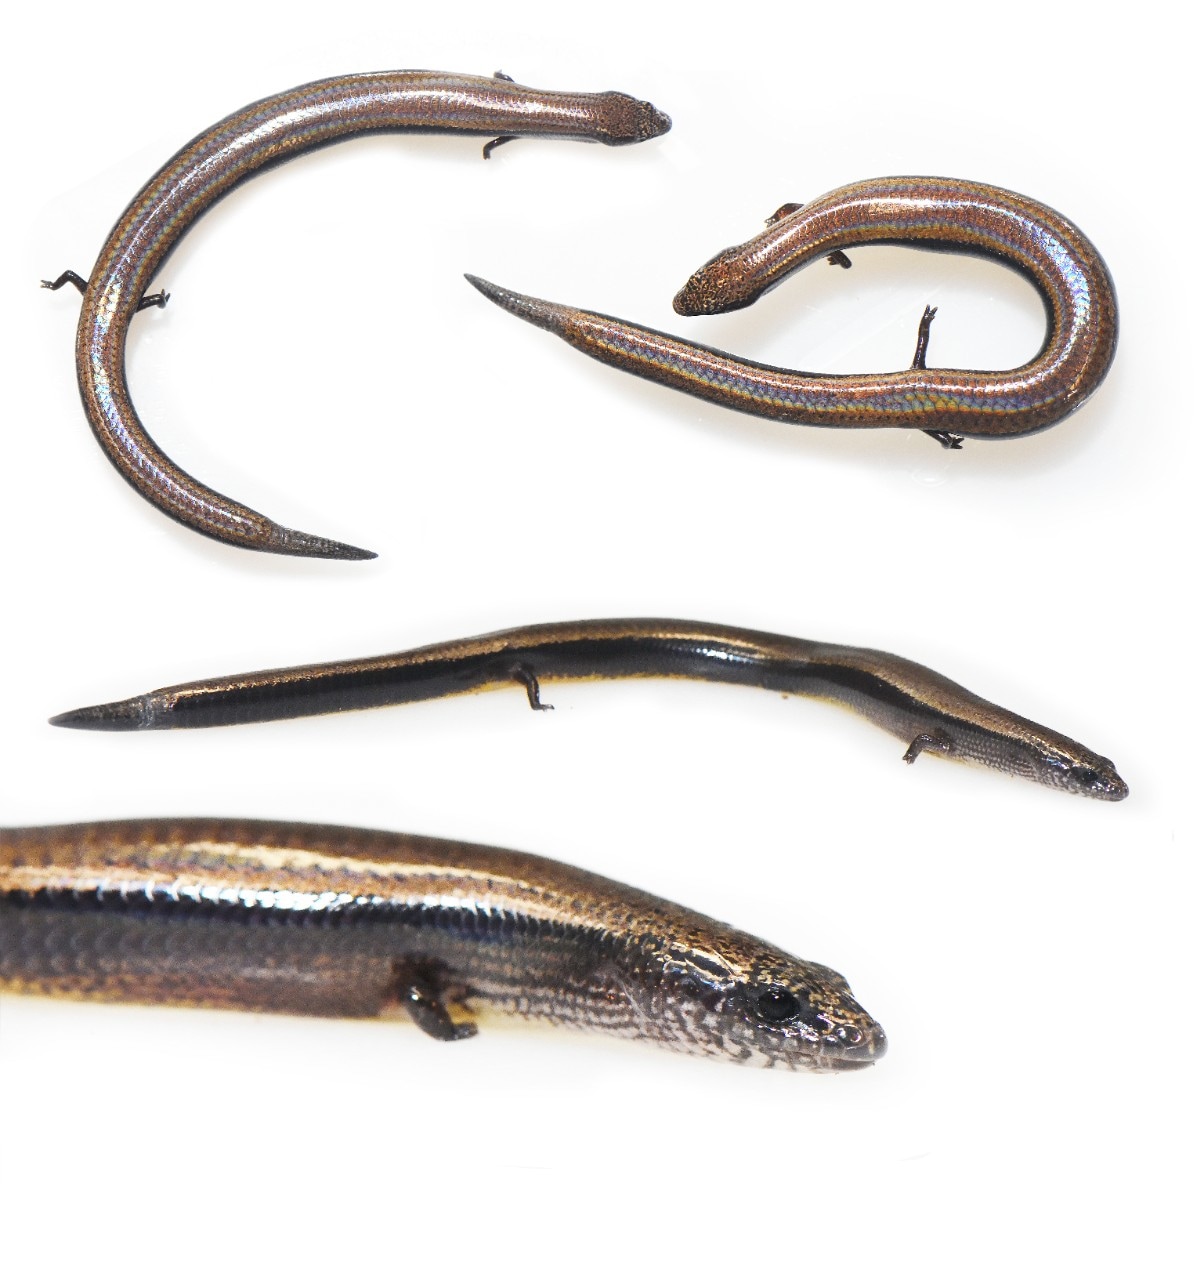 photo of a collection of three-toed skinks